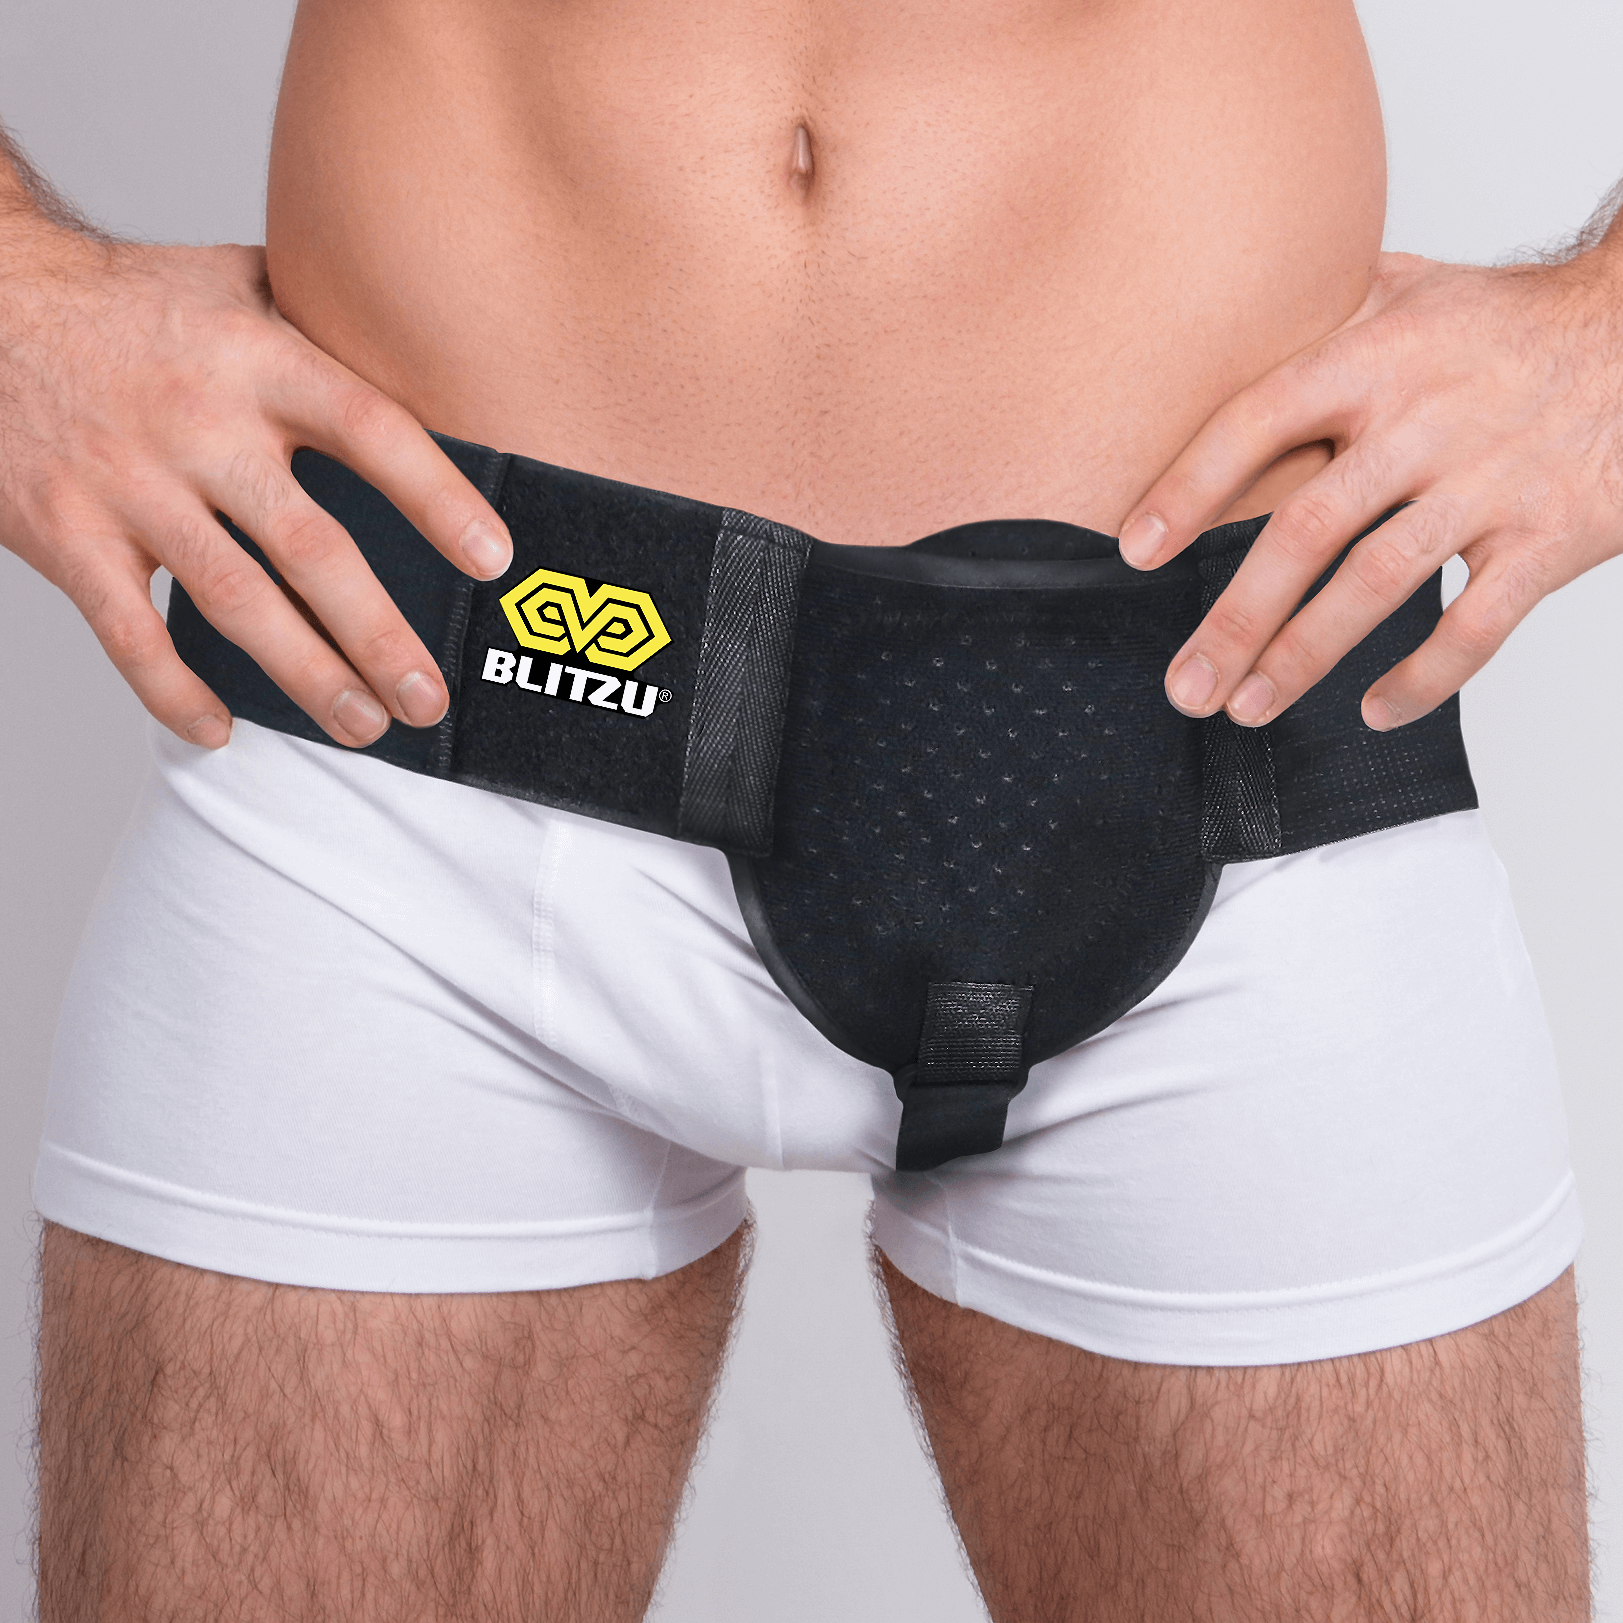 Inguinal Hernia Support for Men, Professional Inguinal Hernia Belts,  Adjustable Hernia Belt Hernia Belt Truss Pain Relief Abdomen Compression  Support